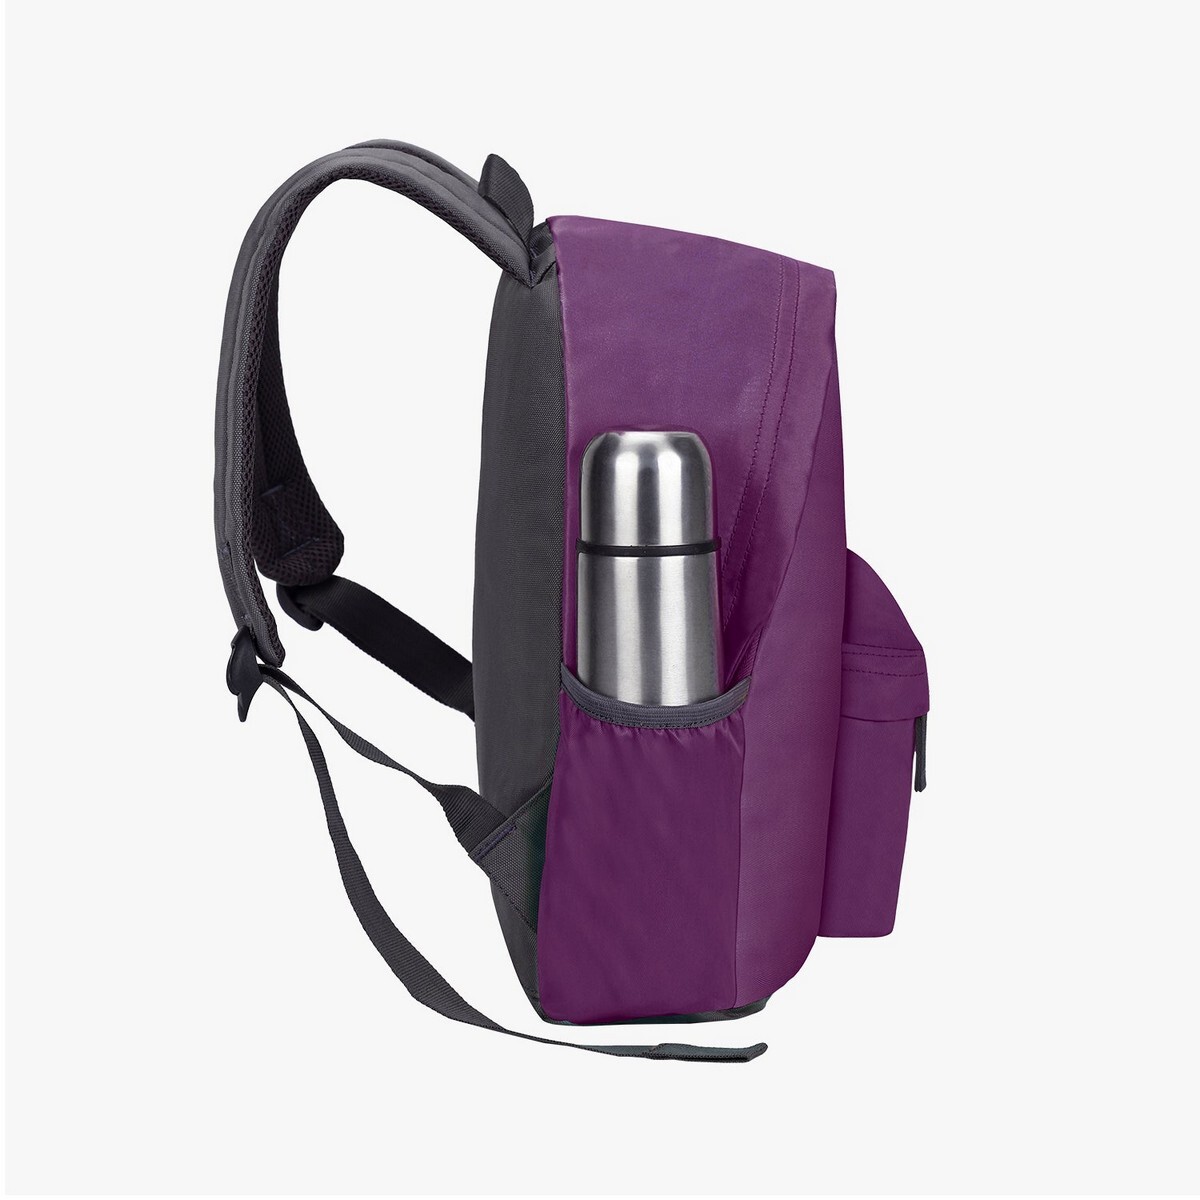 Genie Candy Back Pack 14in Wine